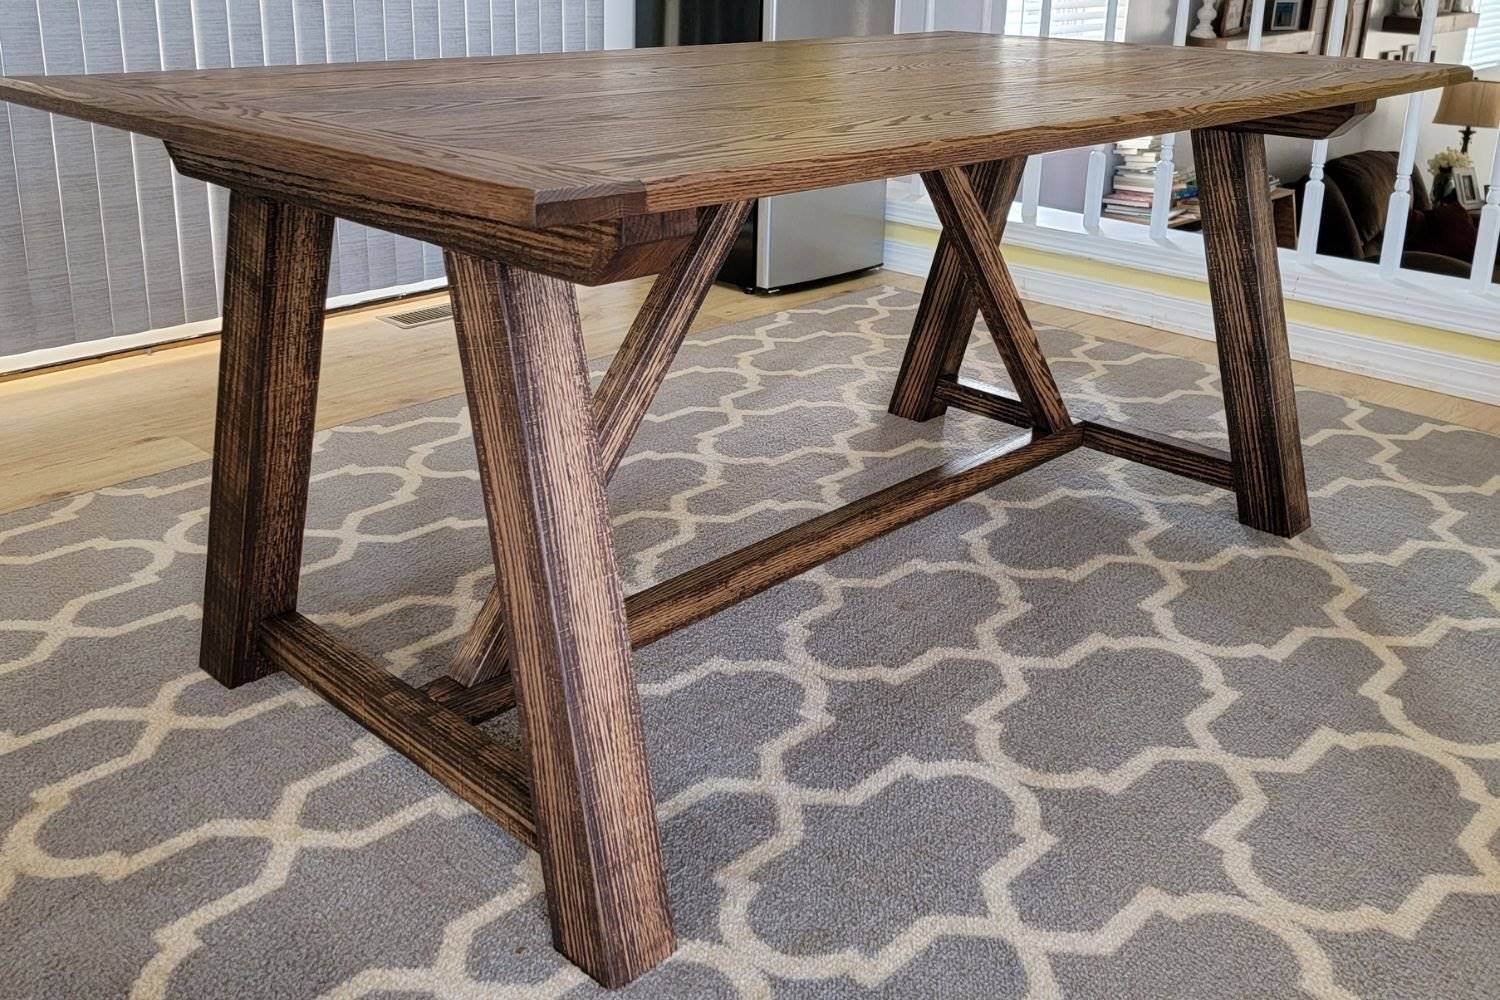 DIY Table Top: Transform Your Space With This Simple Craft Project